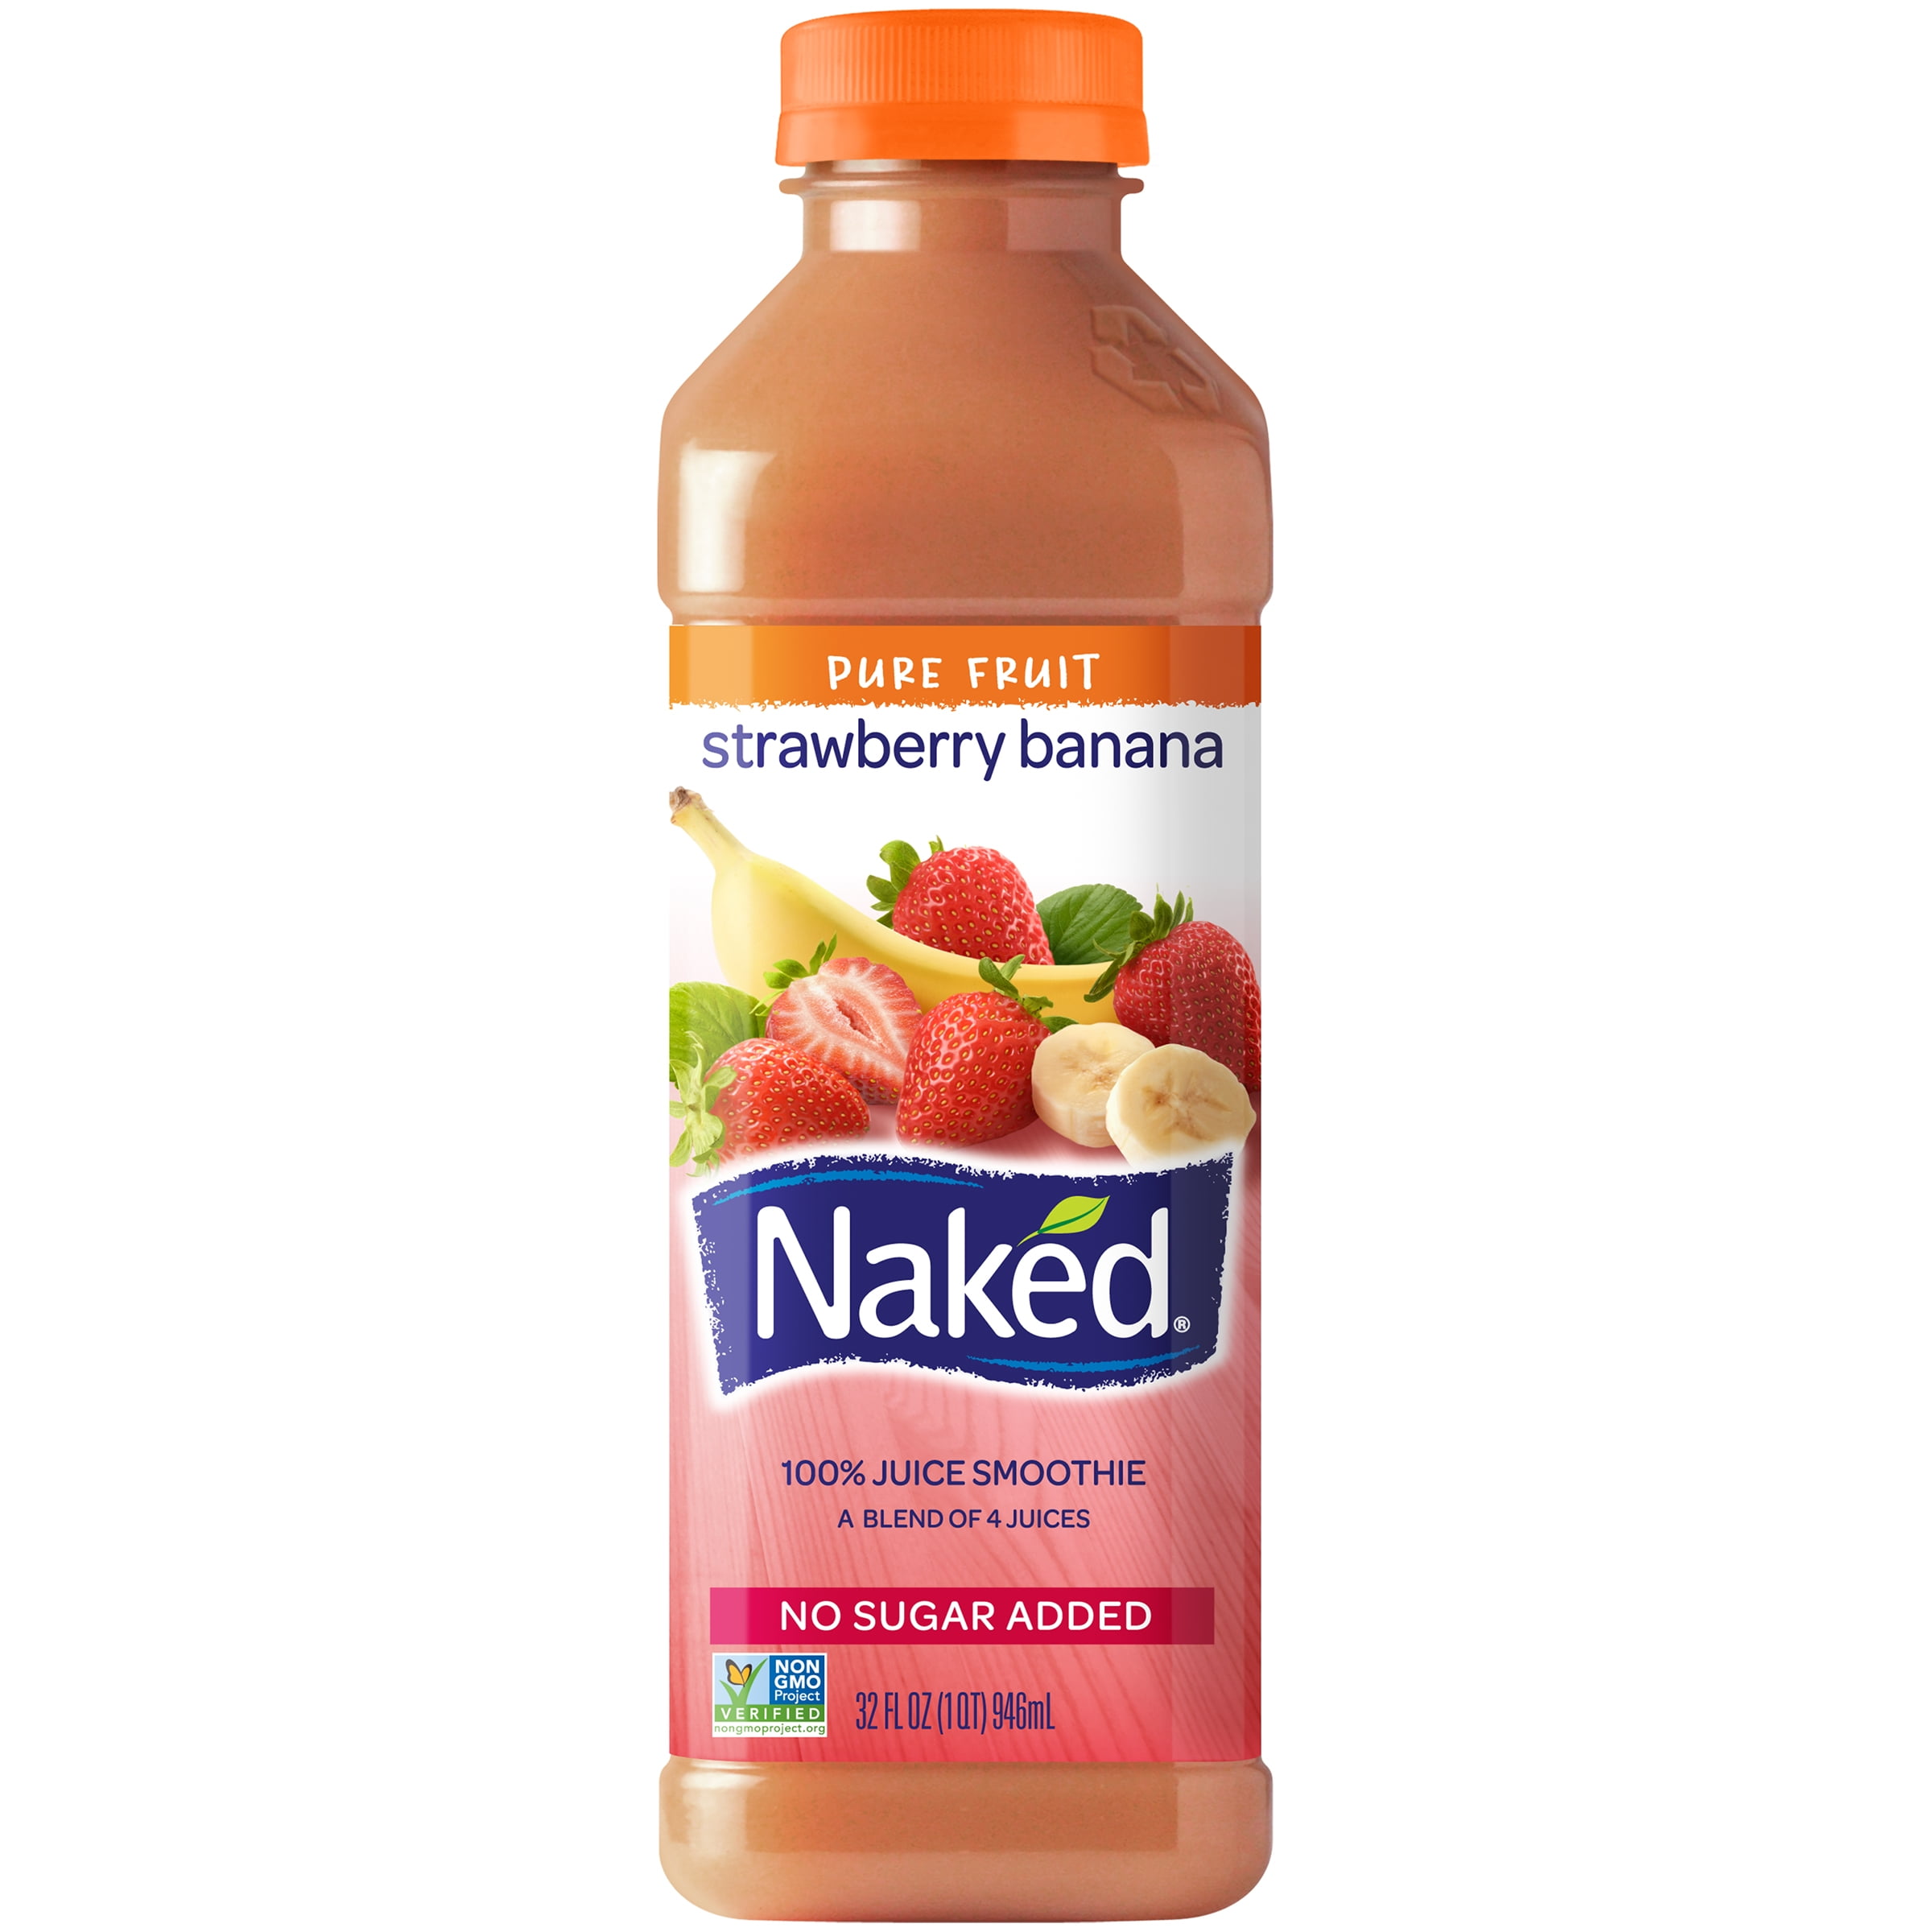 How Healthy Are The Naked Juice Smoothies